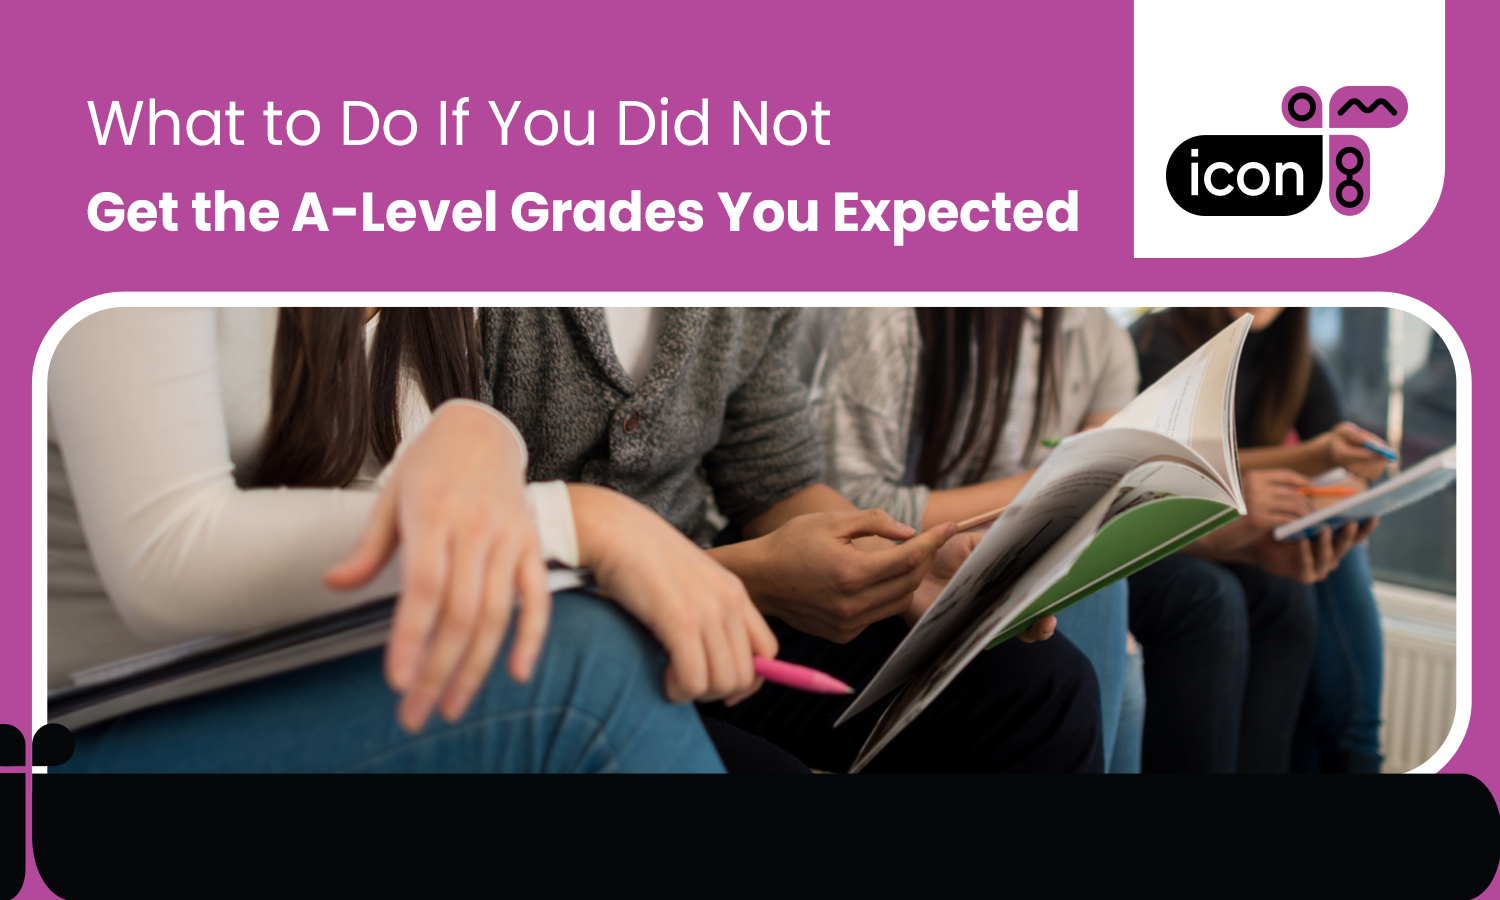 After A-Levels: What to Do If You Didn't Get the Grades That You Want